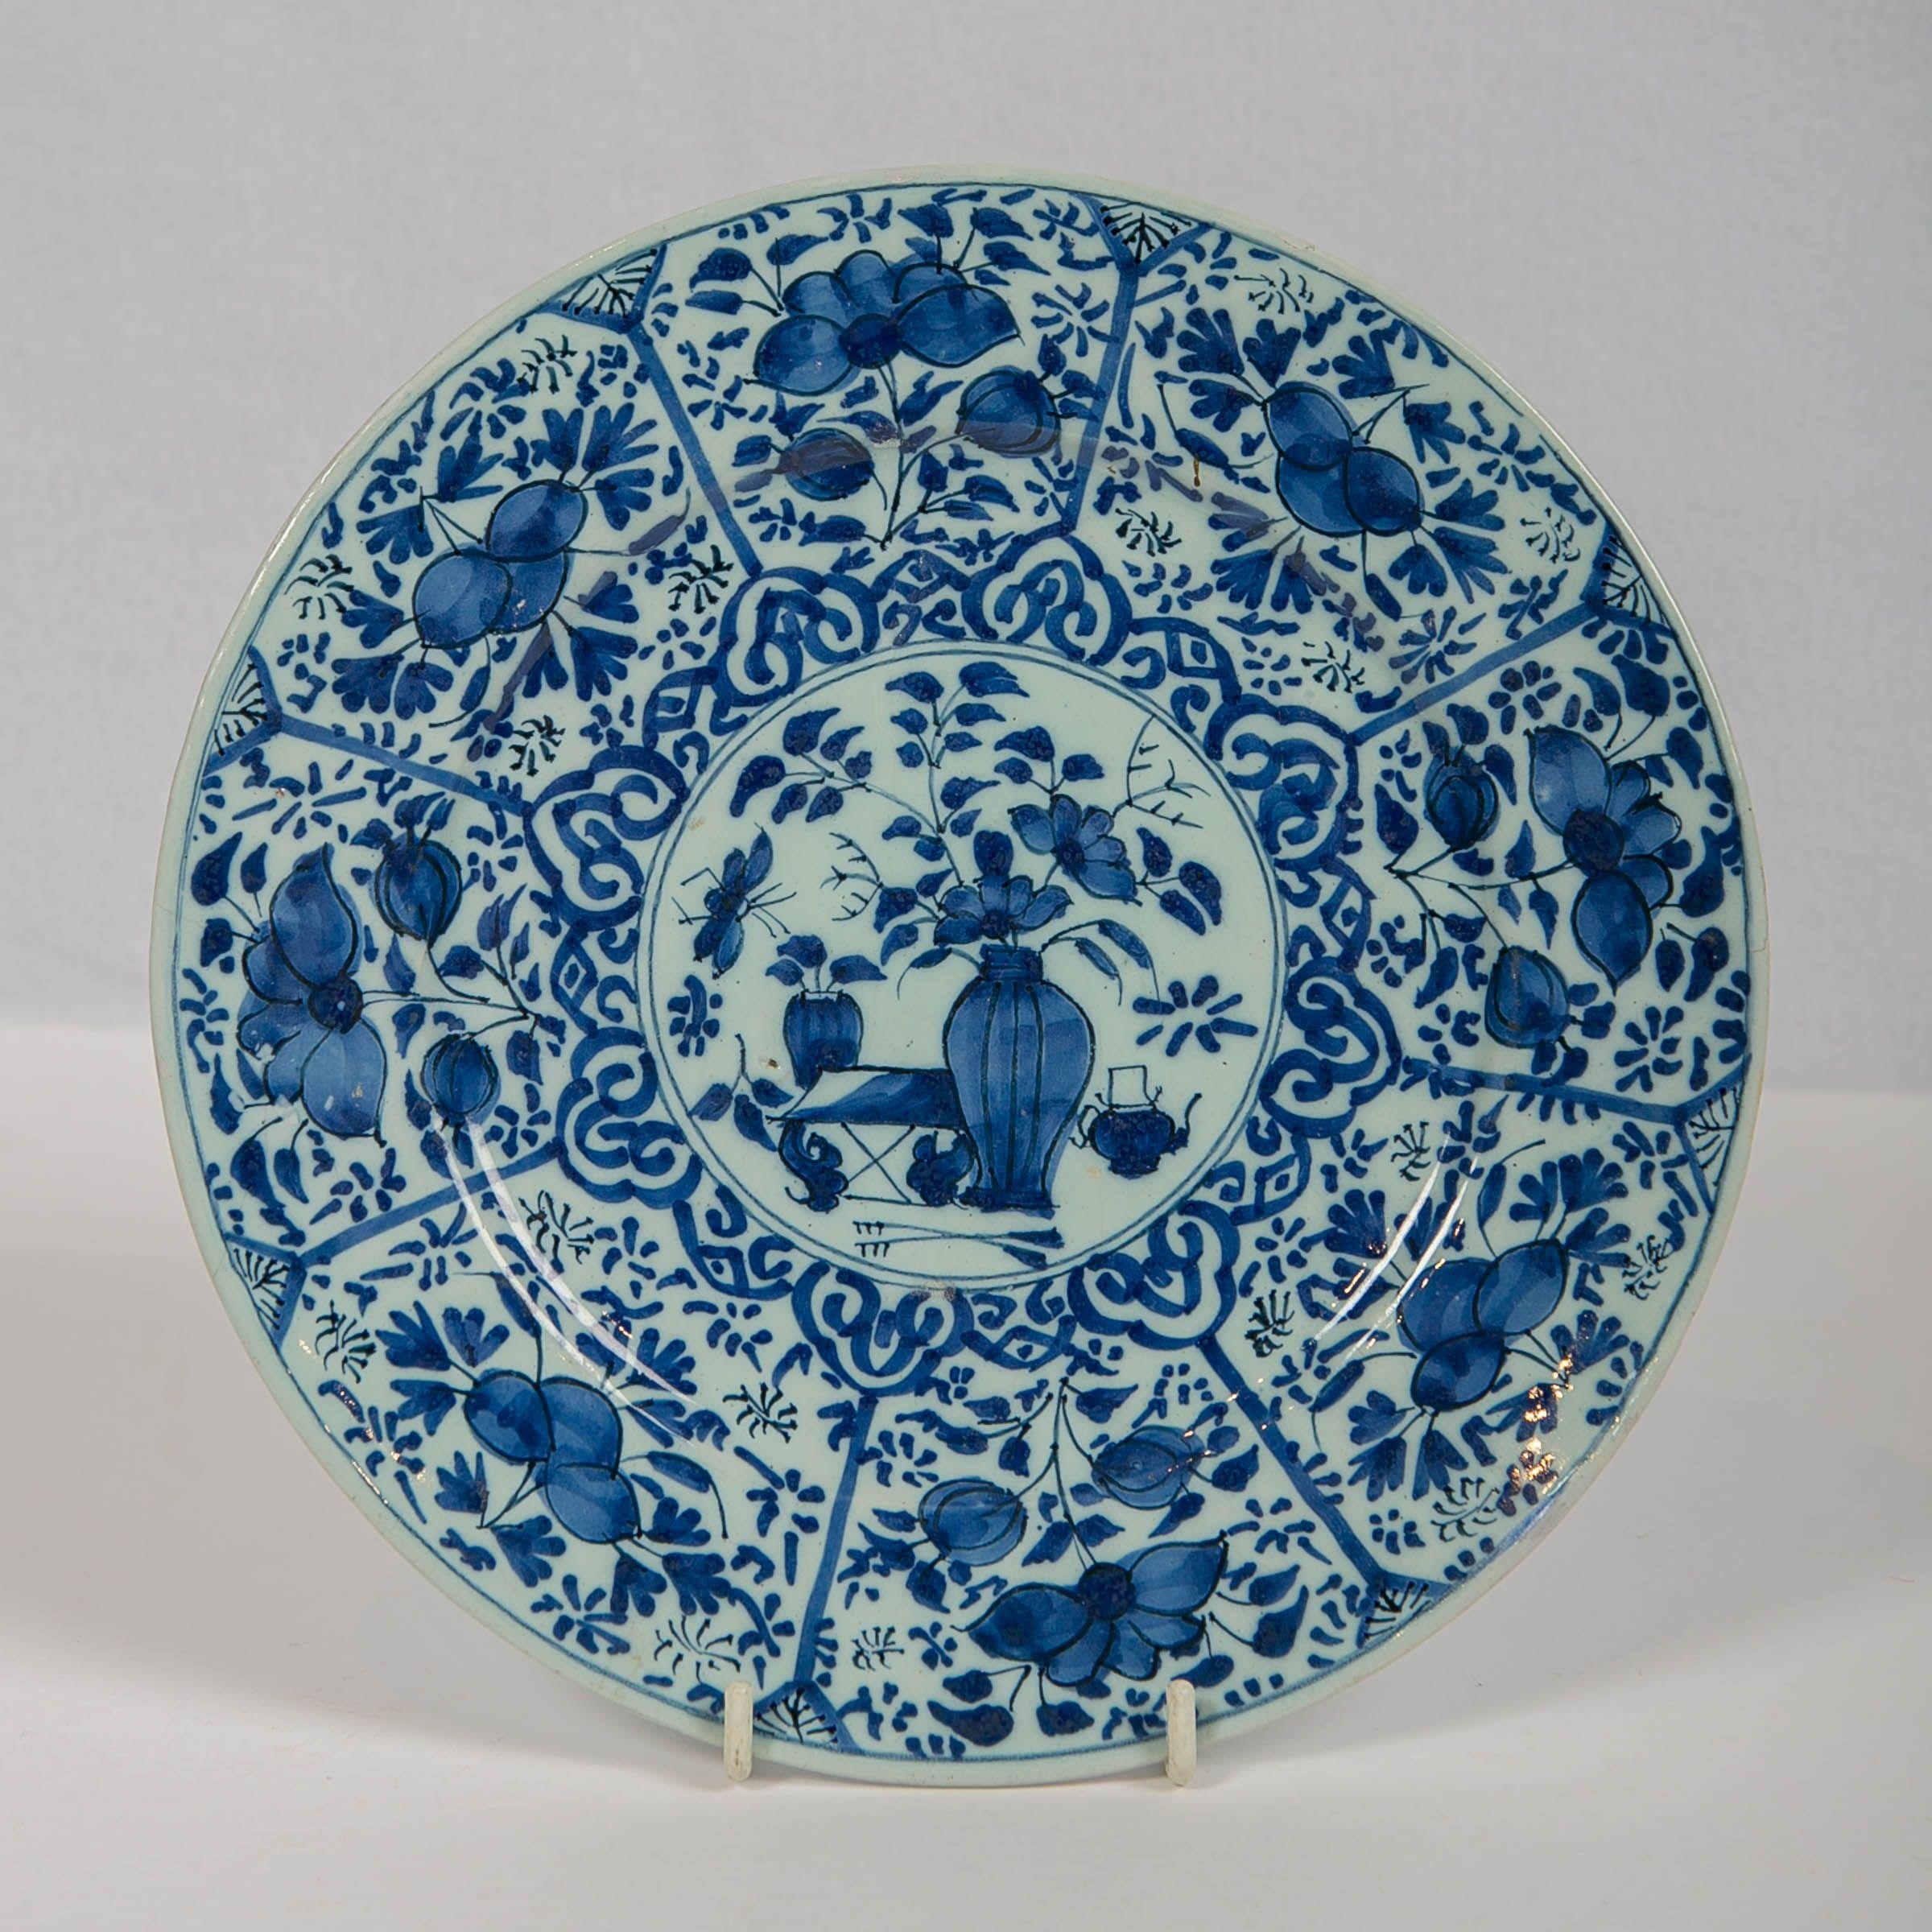 Rococo Pair of Dutch Delft Blue and White Pancake Plates Made 1705-1725